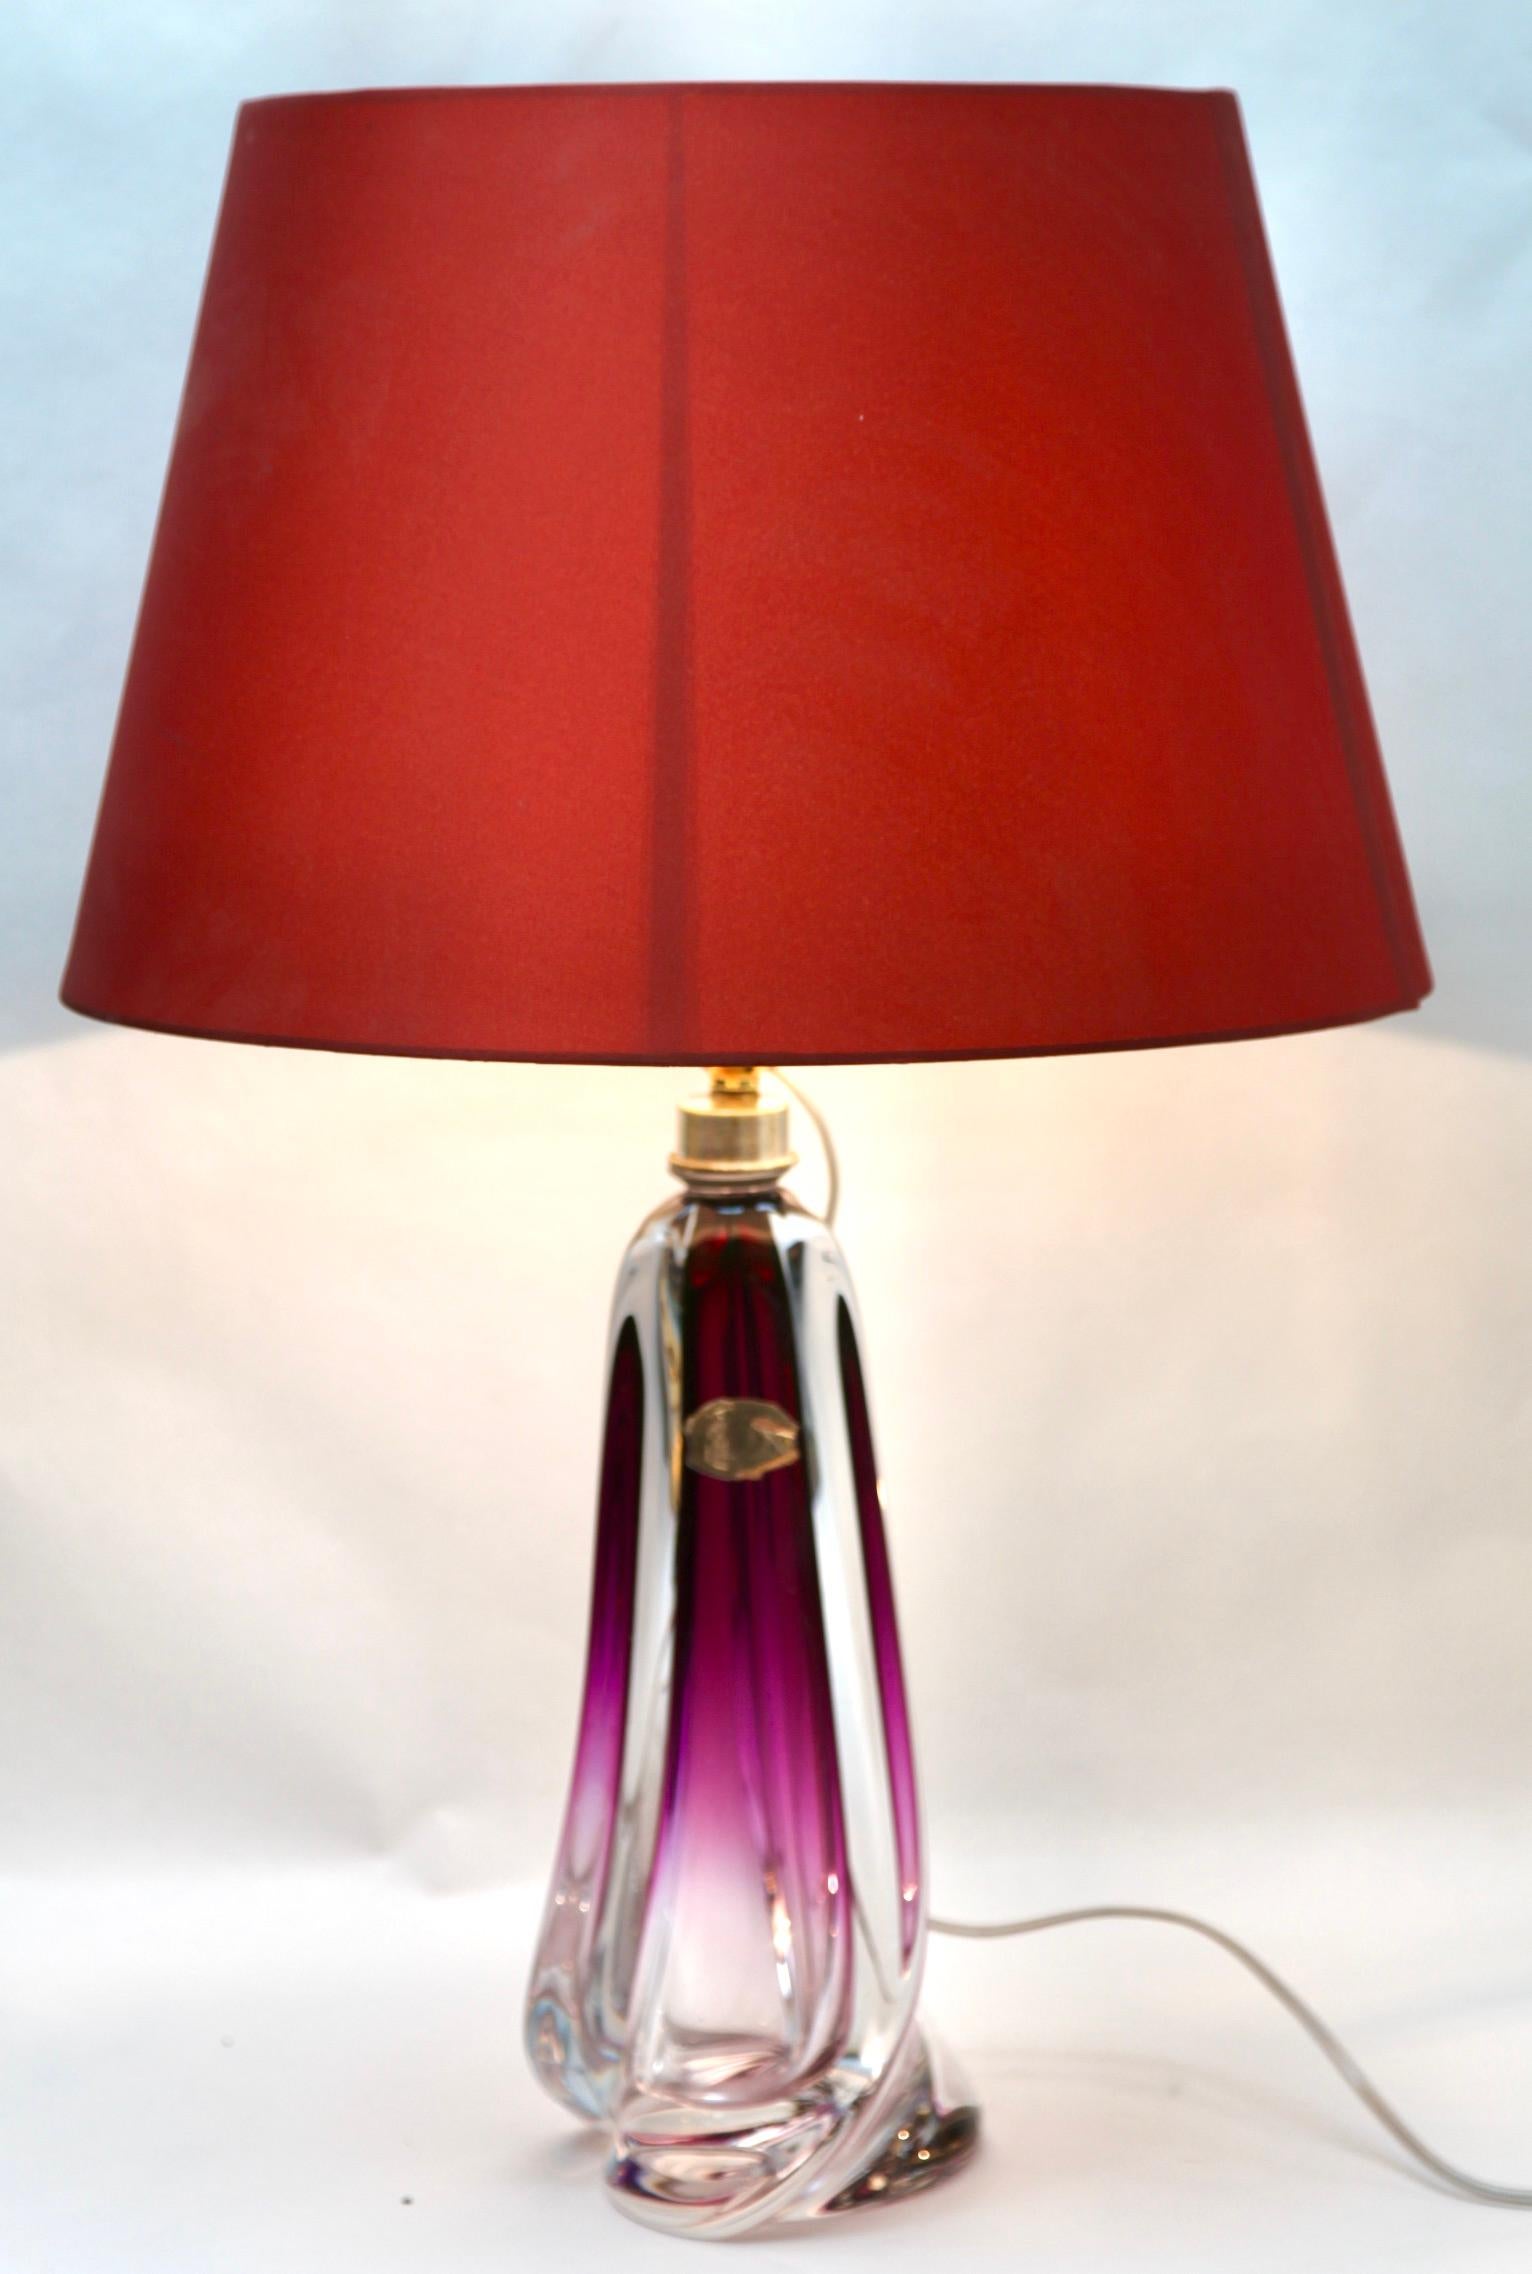 This simple yet graceful table lamp is in large size, 40 cm 15.74 inches excluding the shade.
The colored core in Classic Val Saint Lambert tint, has been given a thick Sommerso (clear crystal casing) so that the object appears delicate whilst